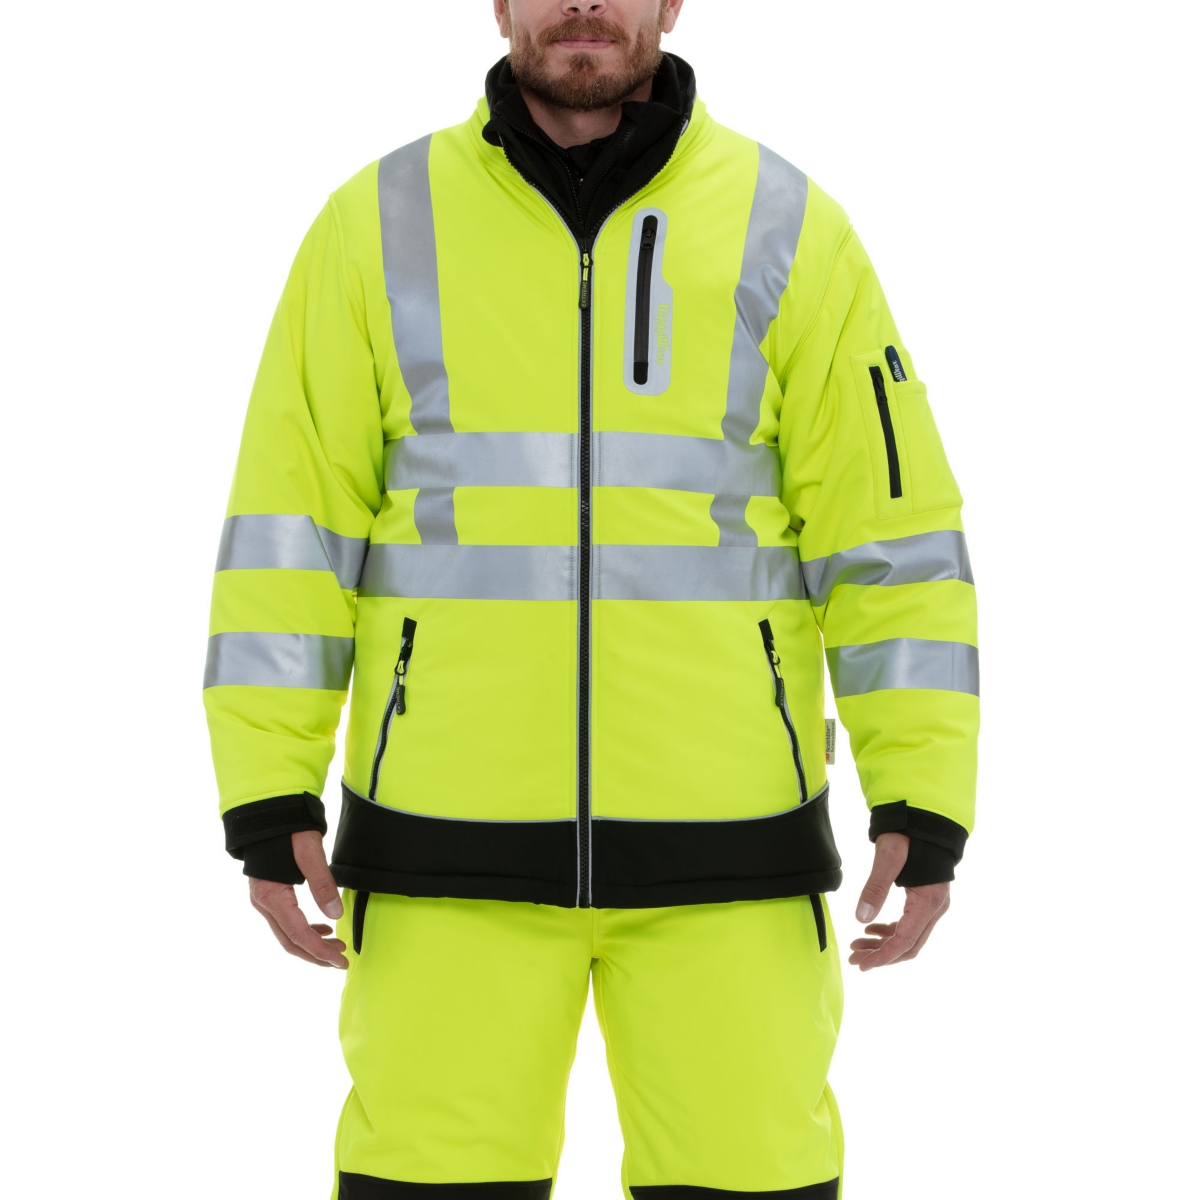 Big & Tall Insulated HiVis Extreme Softshell Jacket with Reflective Tape - Black/Lime W/ Tape